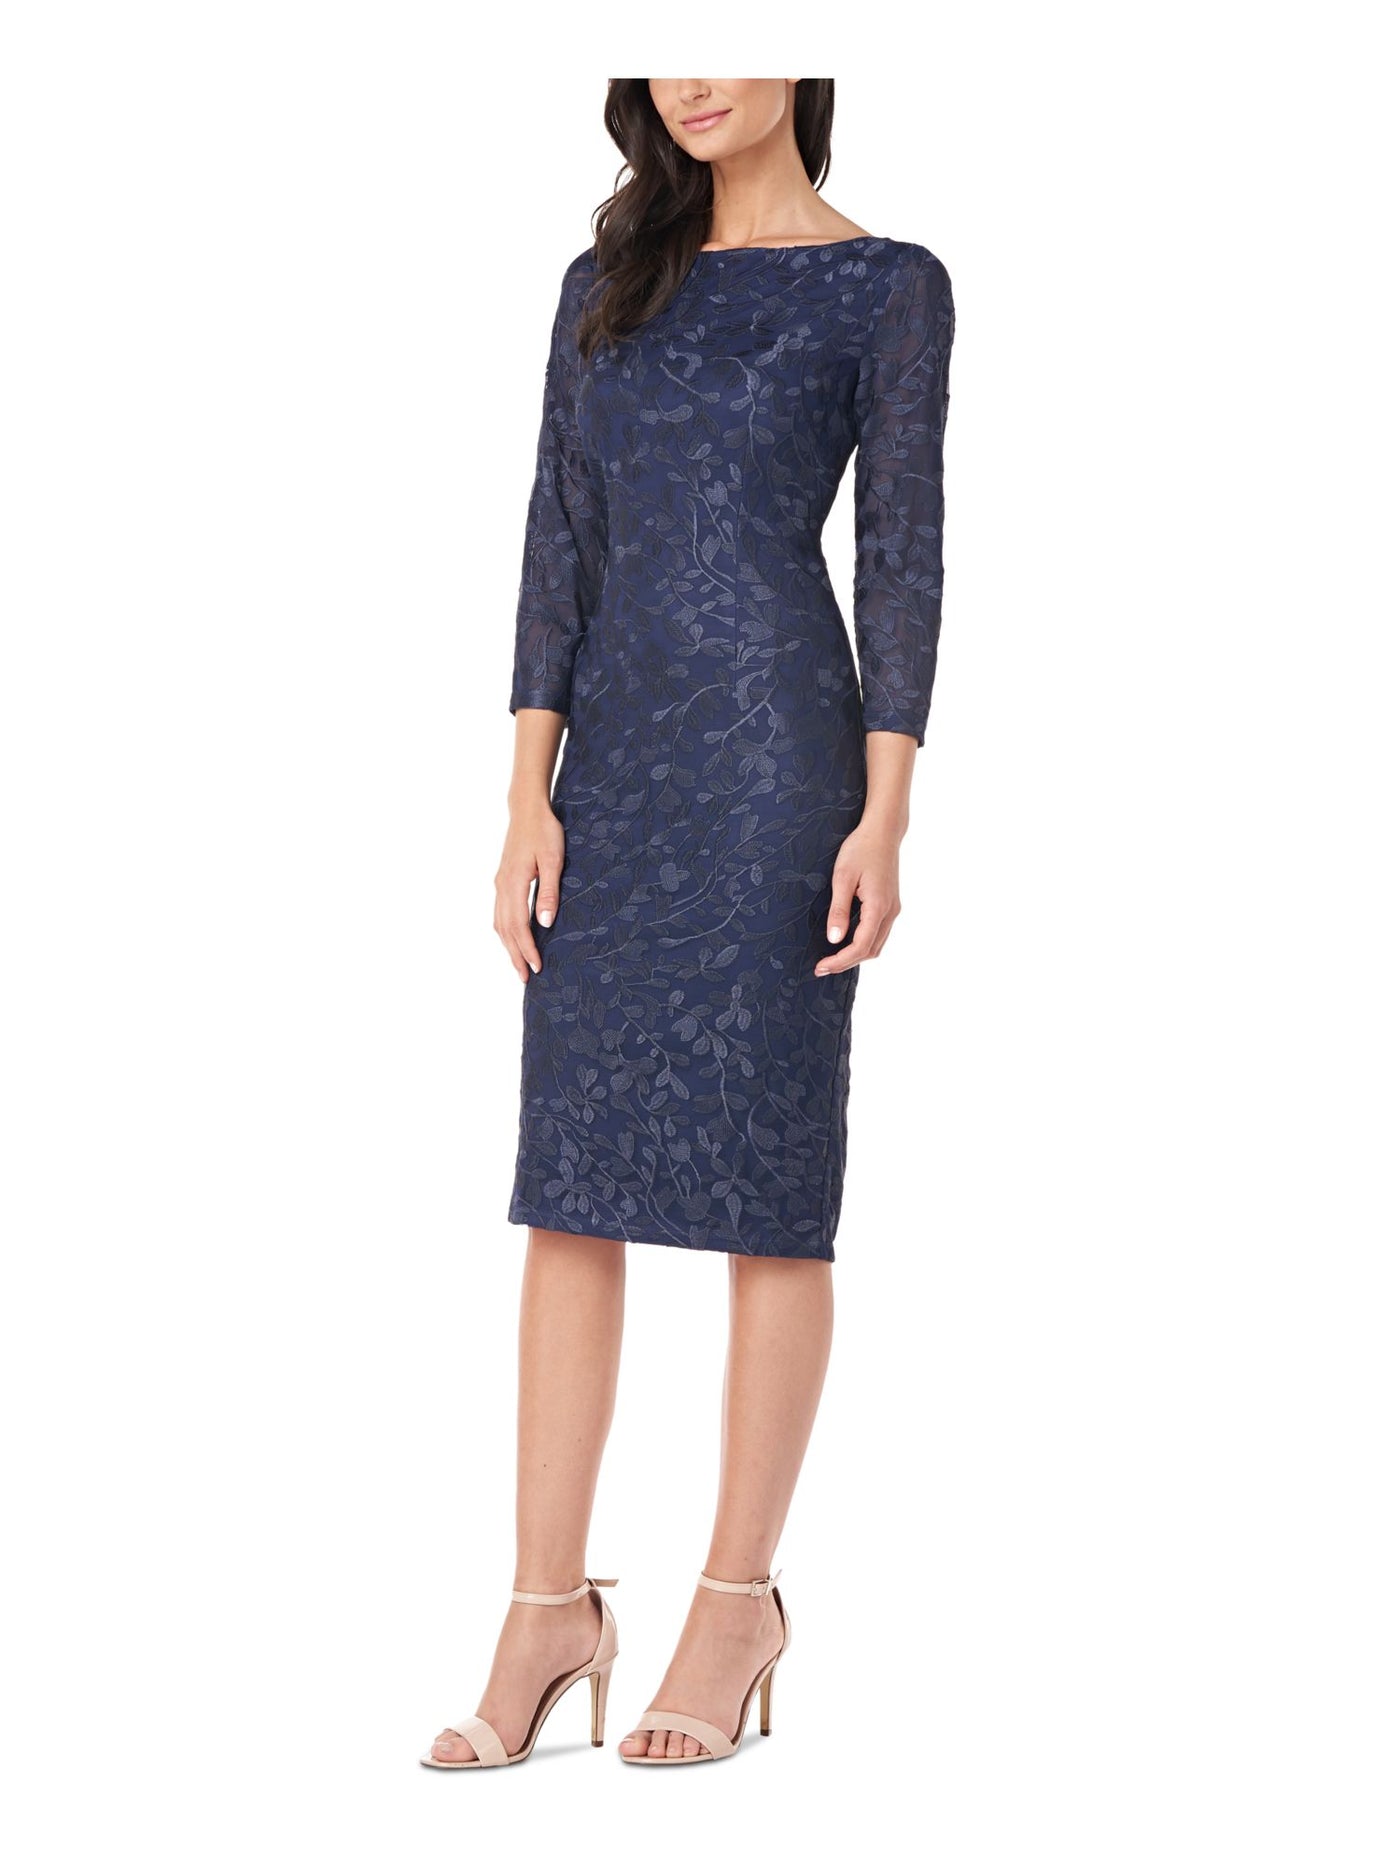 JS COLLECTION Womens Navy Embroidered Zippered 3/4 Sleeve Boat Neck Below The Knee Evening Sheath Dress 2